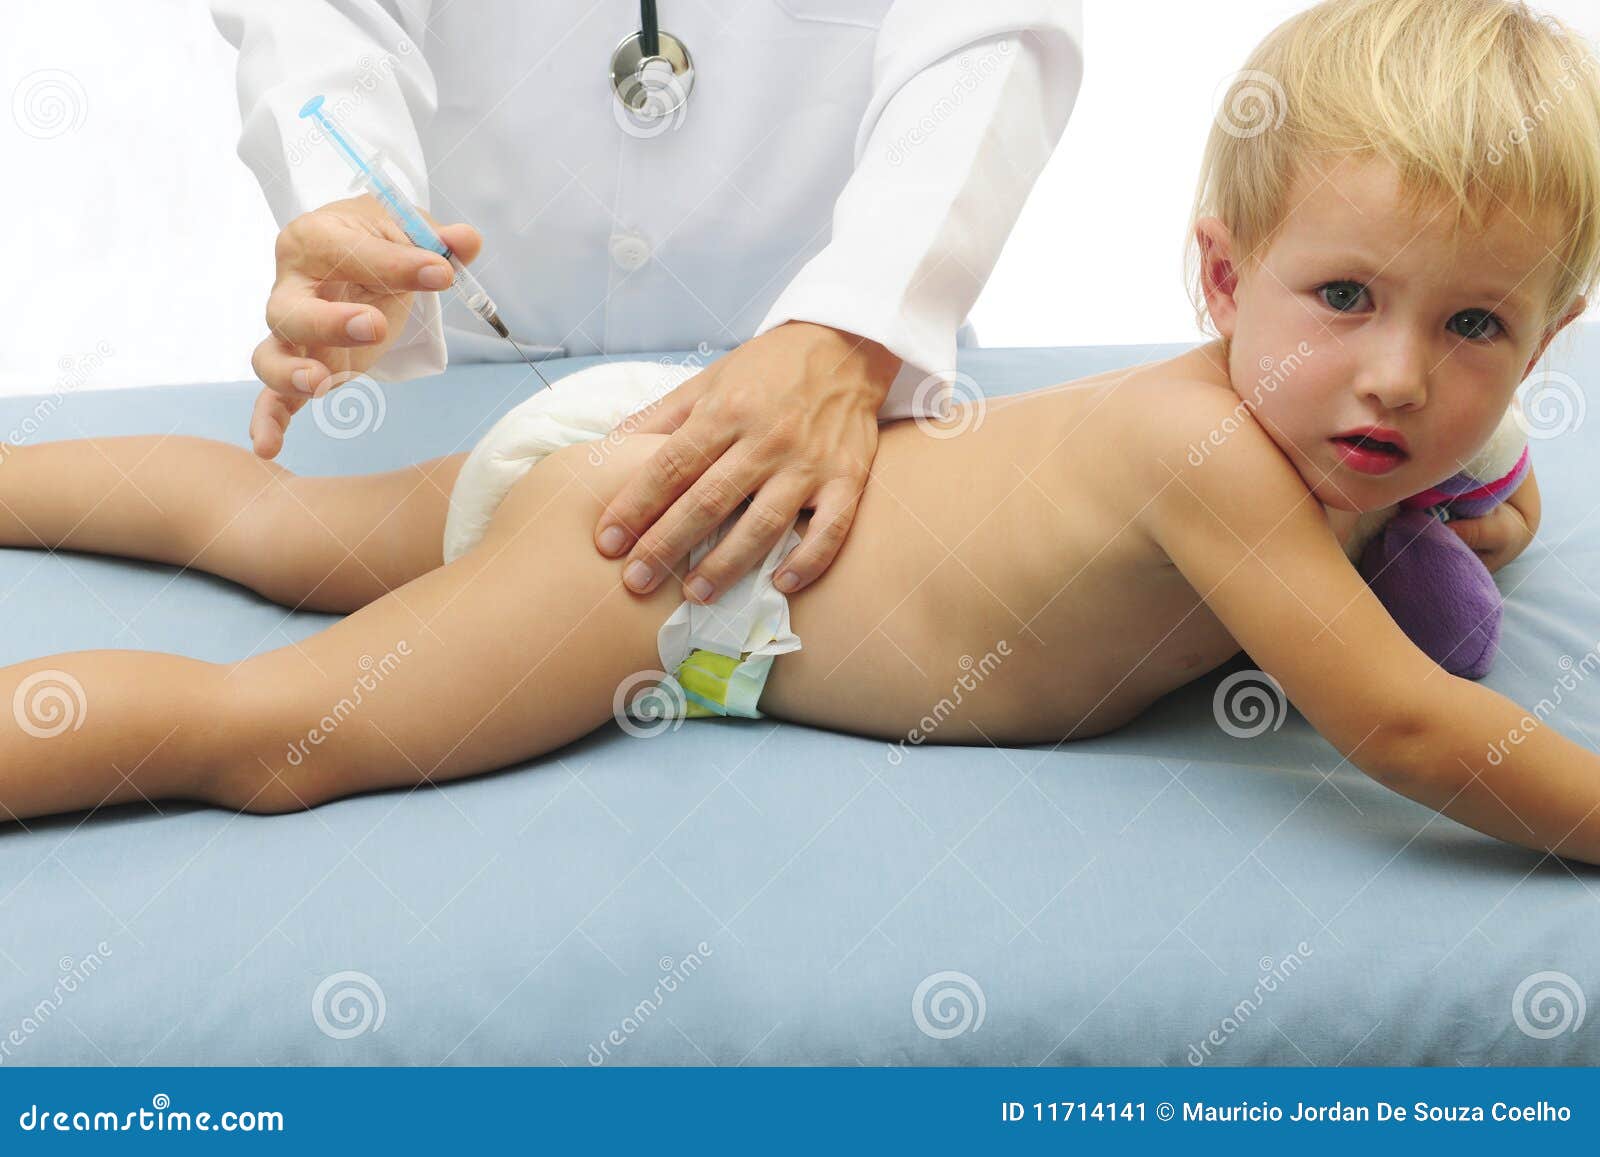 vaccination: doctor injecting baby